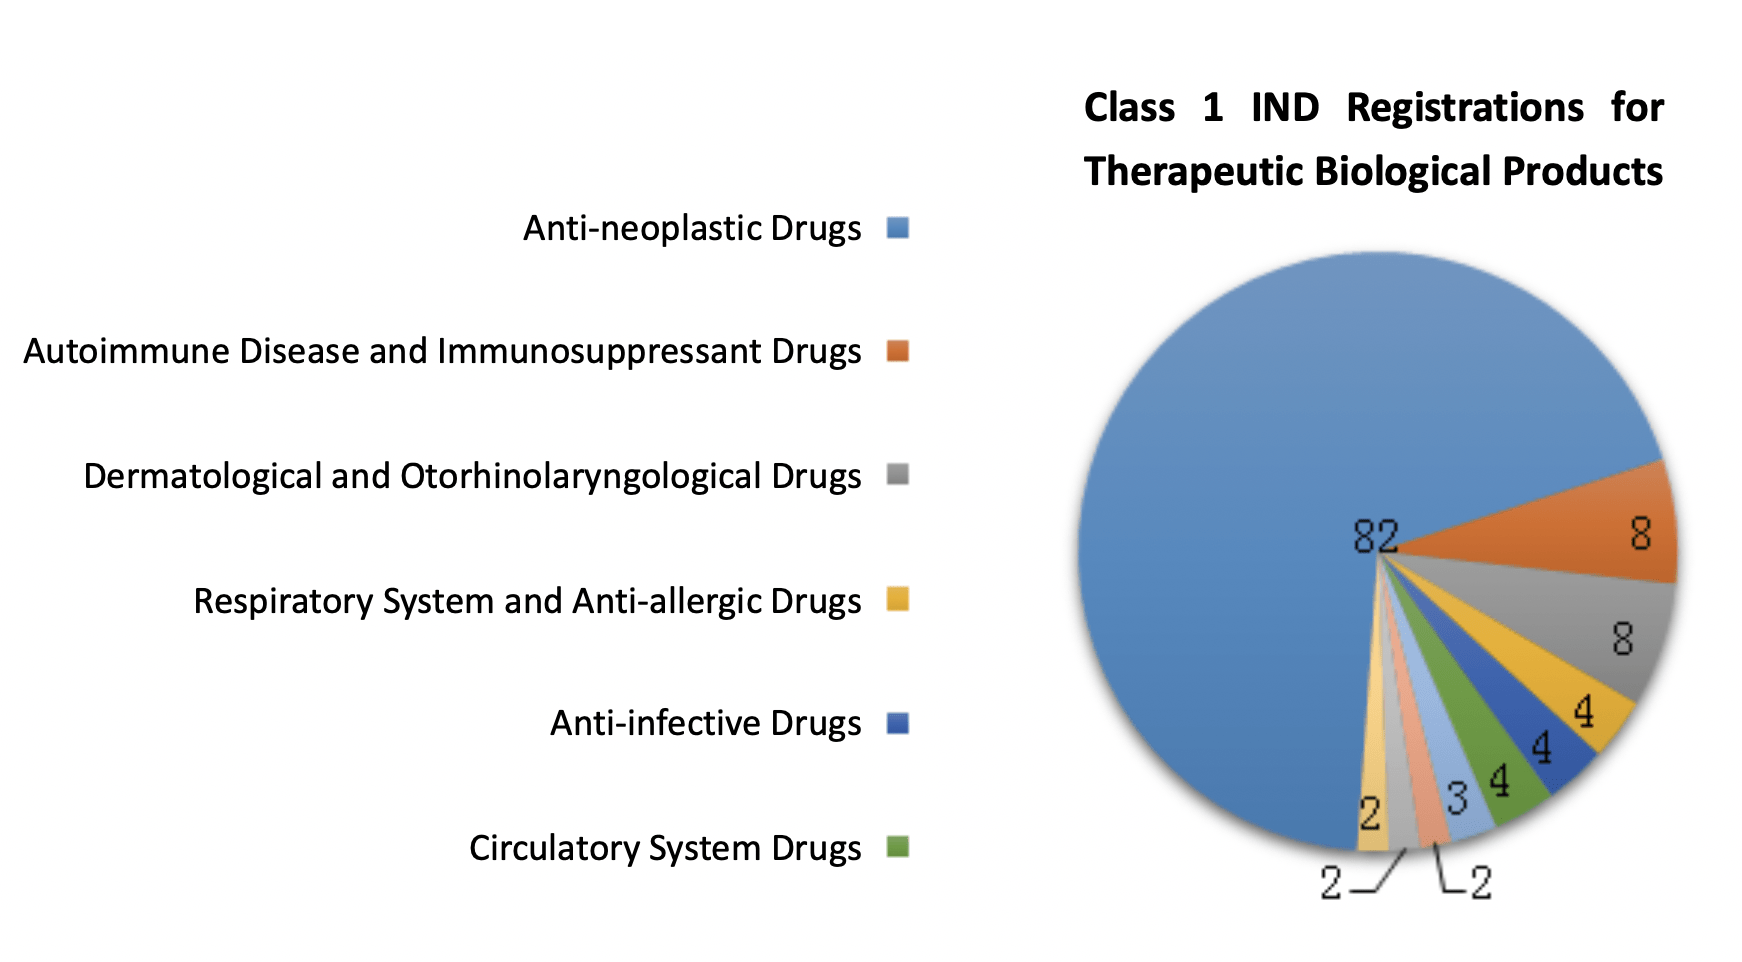 Fig. 12 Number of IND Registrations for Different Indications of Therapeutic Biological Products in 2019